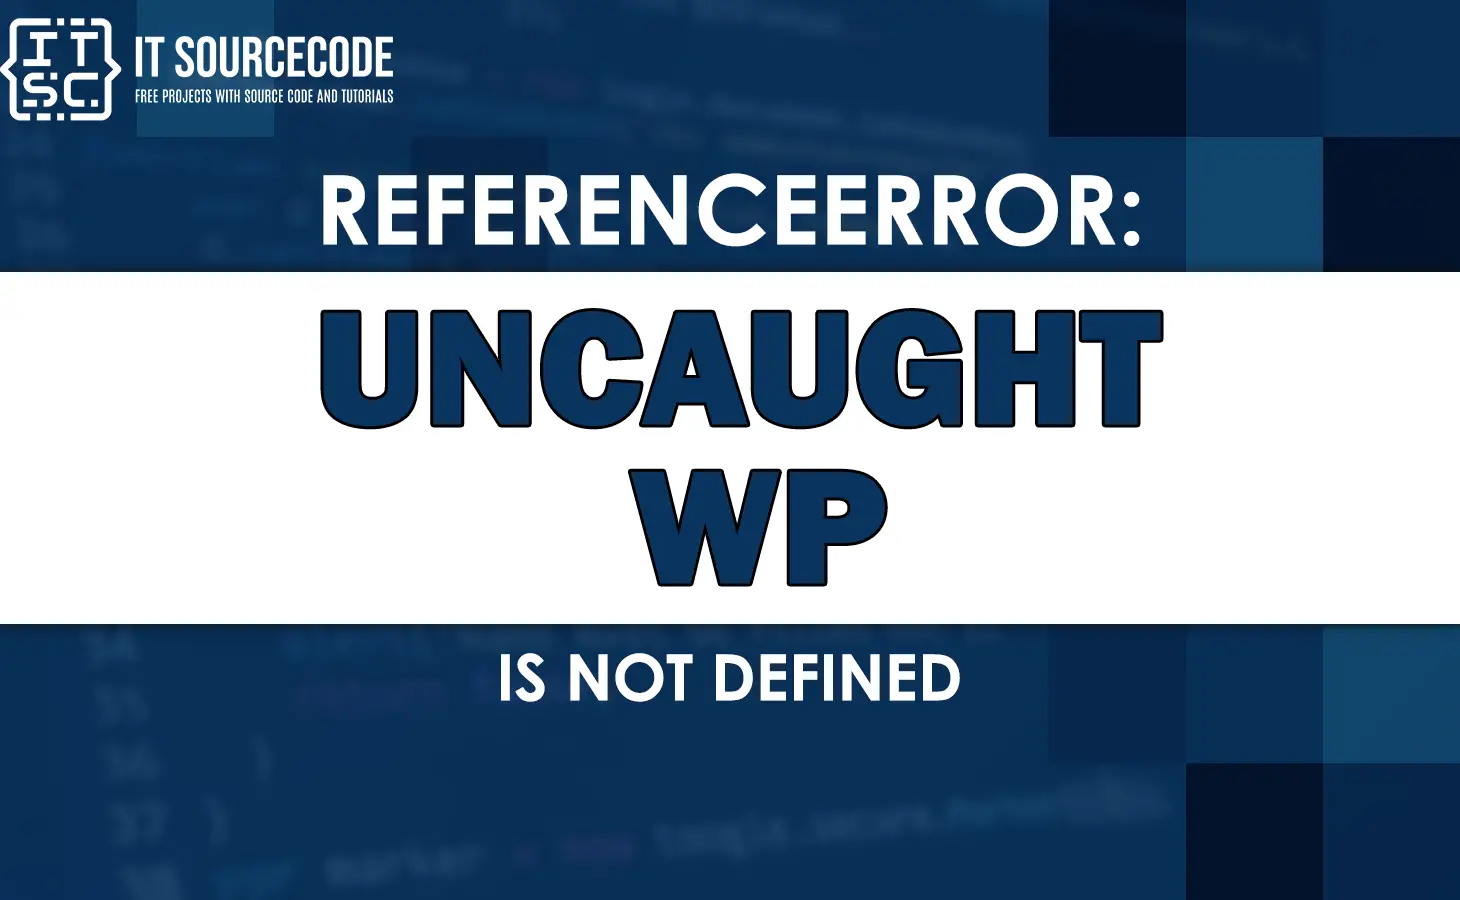 Uncaught referenceerror wp is not defined [SOLVED]